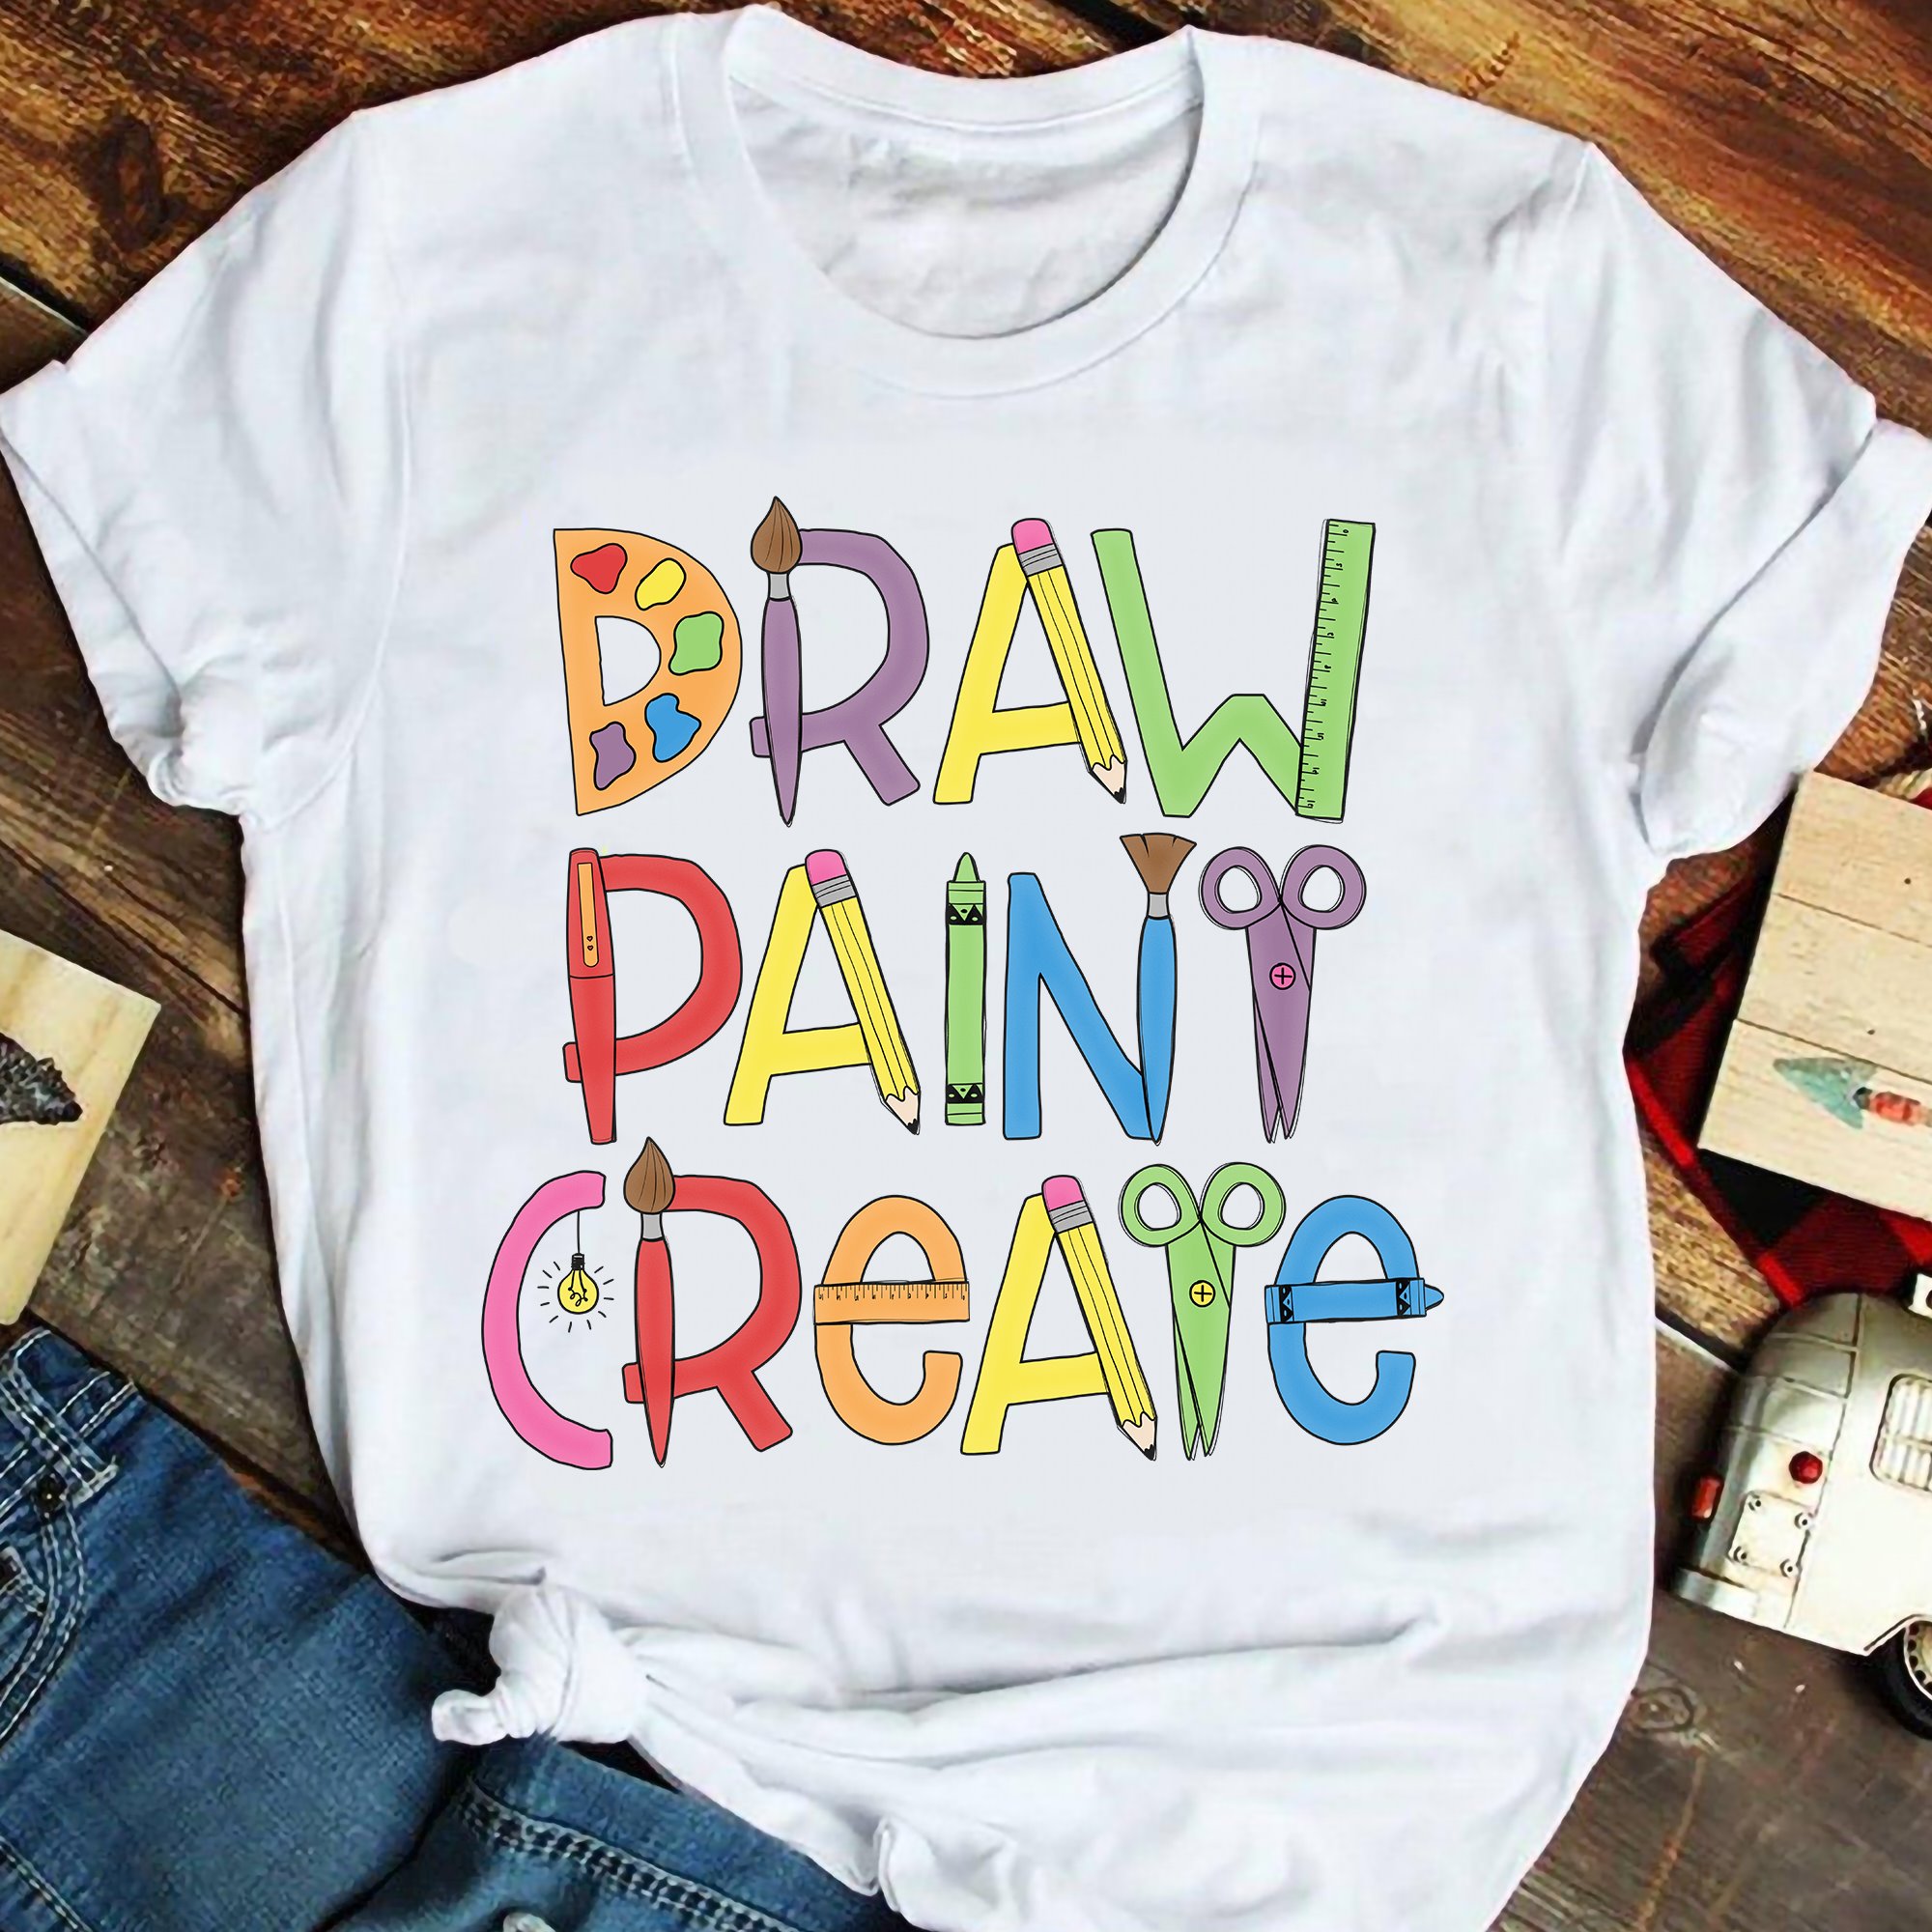 Draw pant create - Creative people gift, love drawing painting